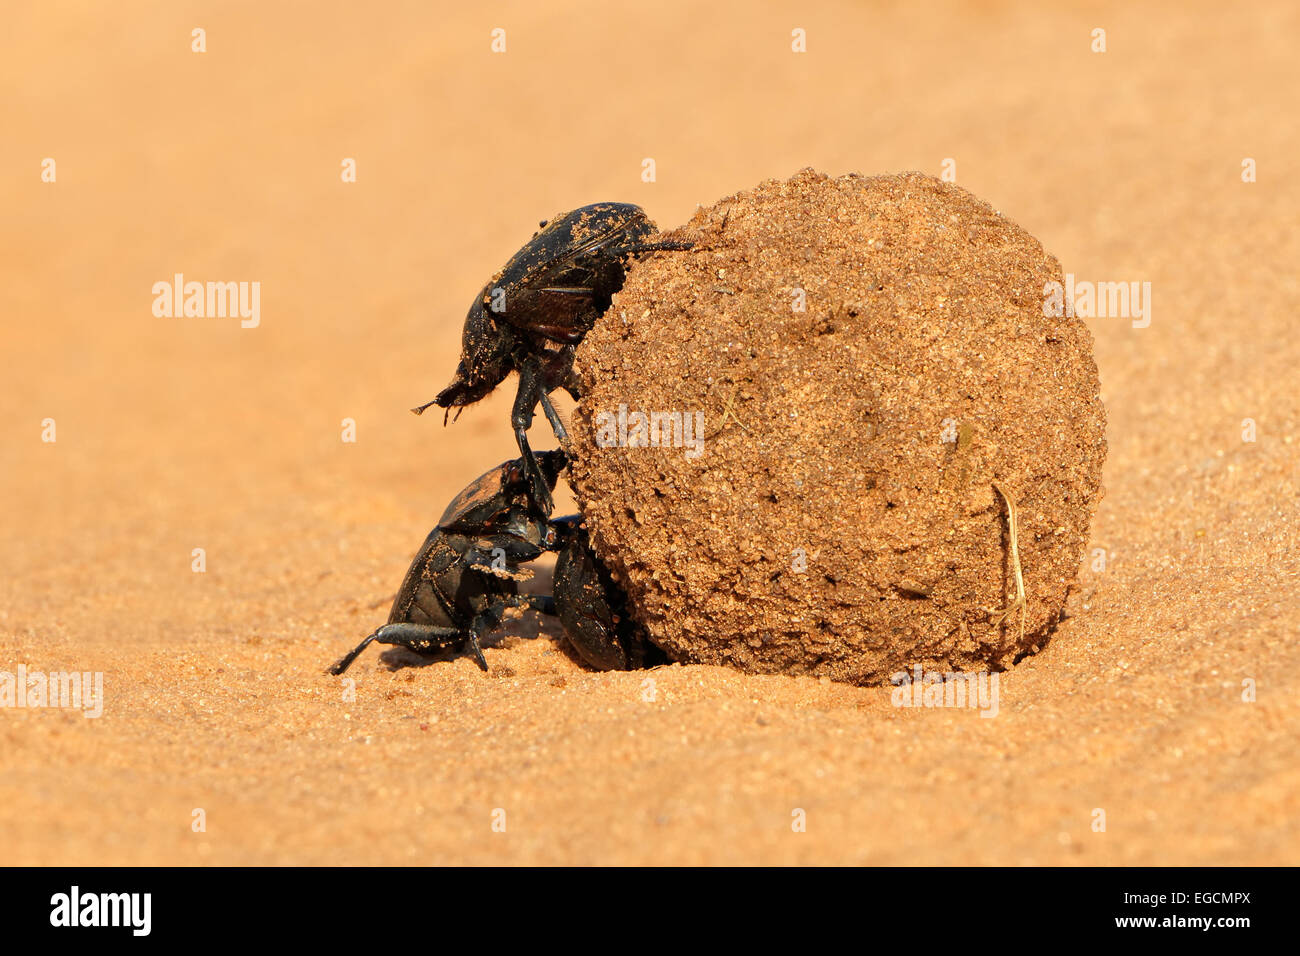 Dung beetles rolling their sand covered dung ball, South Africa Stock Photo